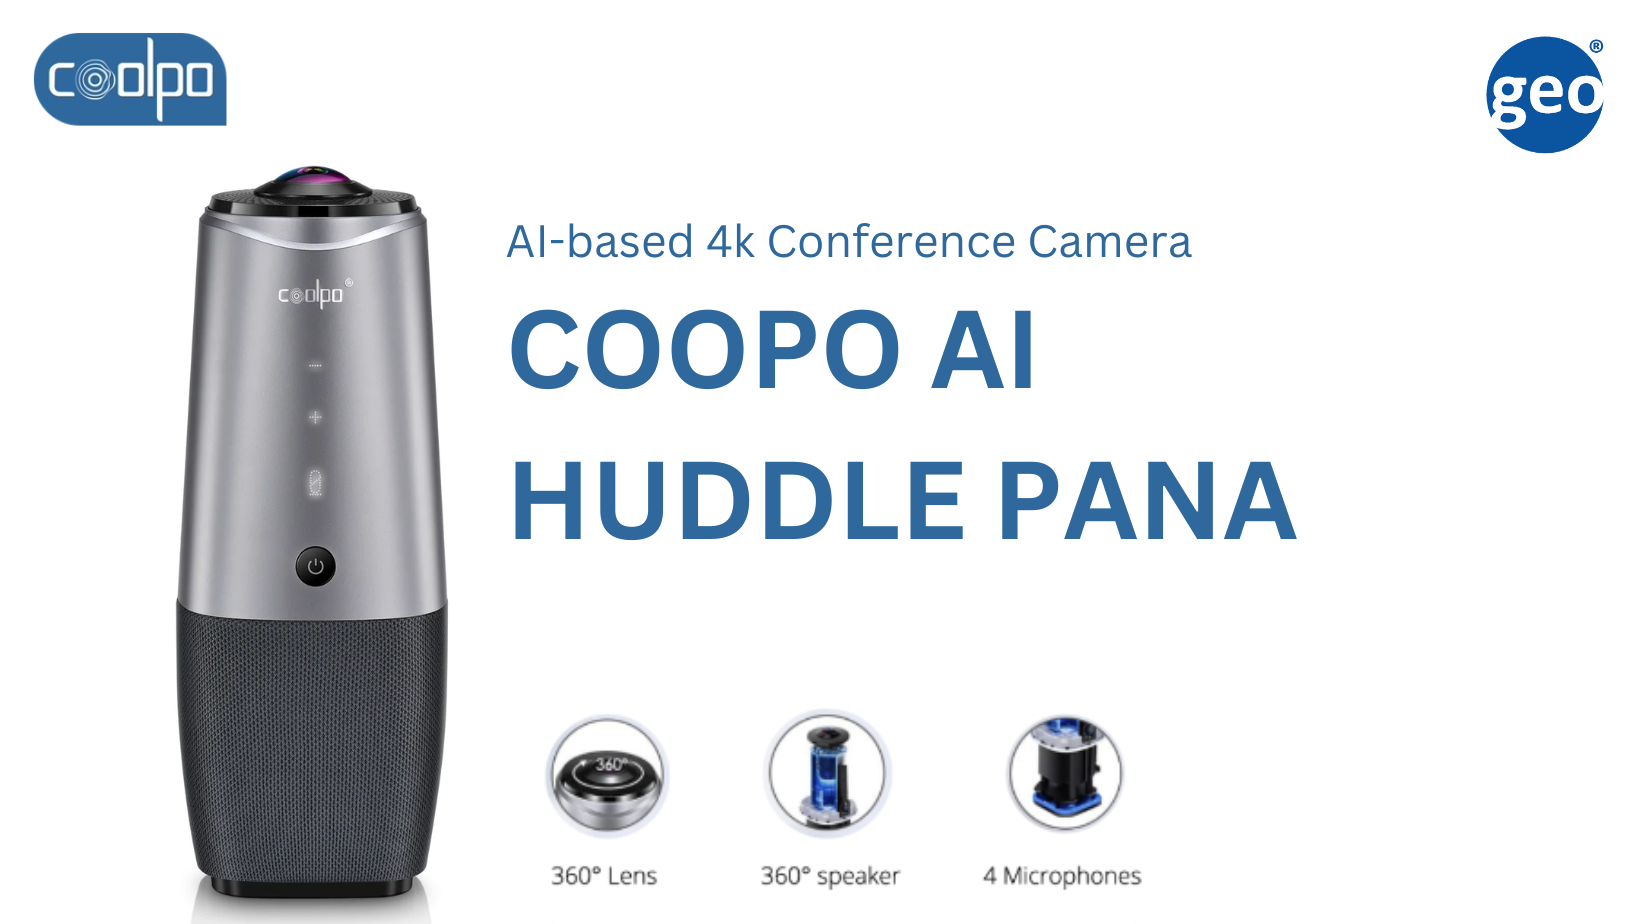 Coolpo: AI Huddle PANA a 360-degree Video Conference Camera for Teams, Zoom, WebEx, and more!